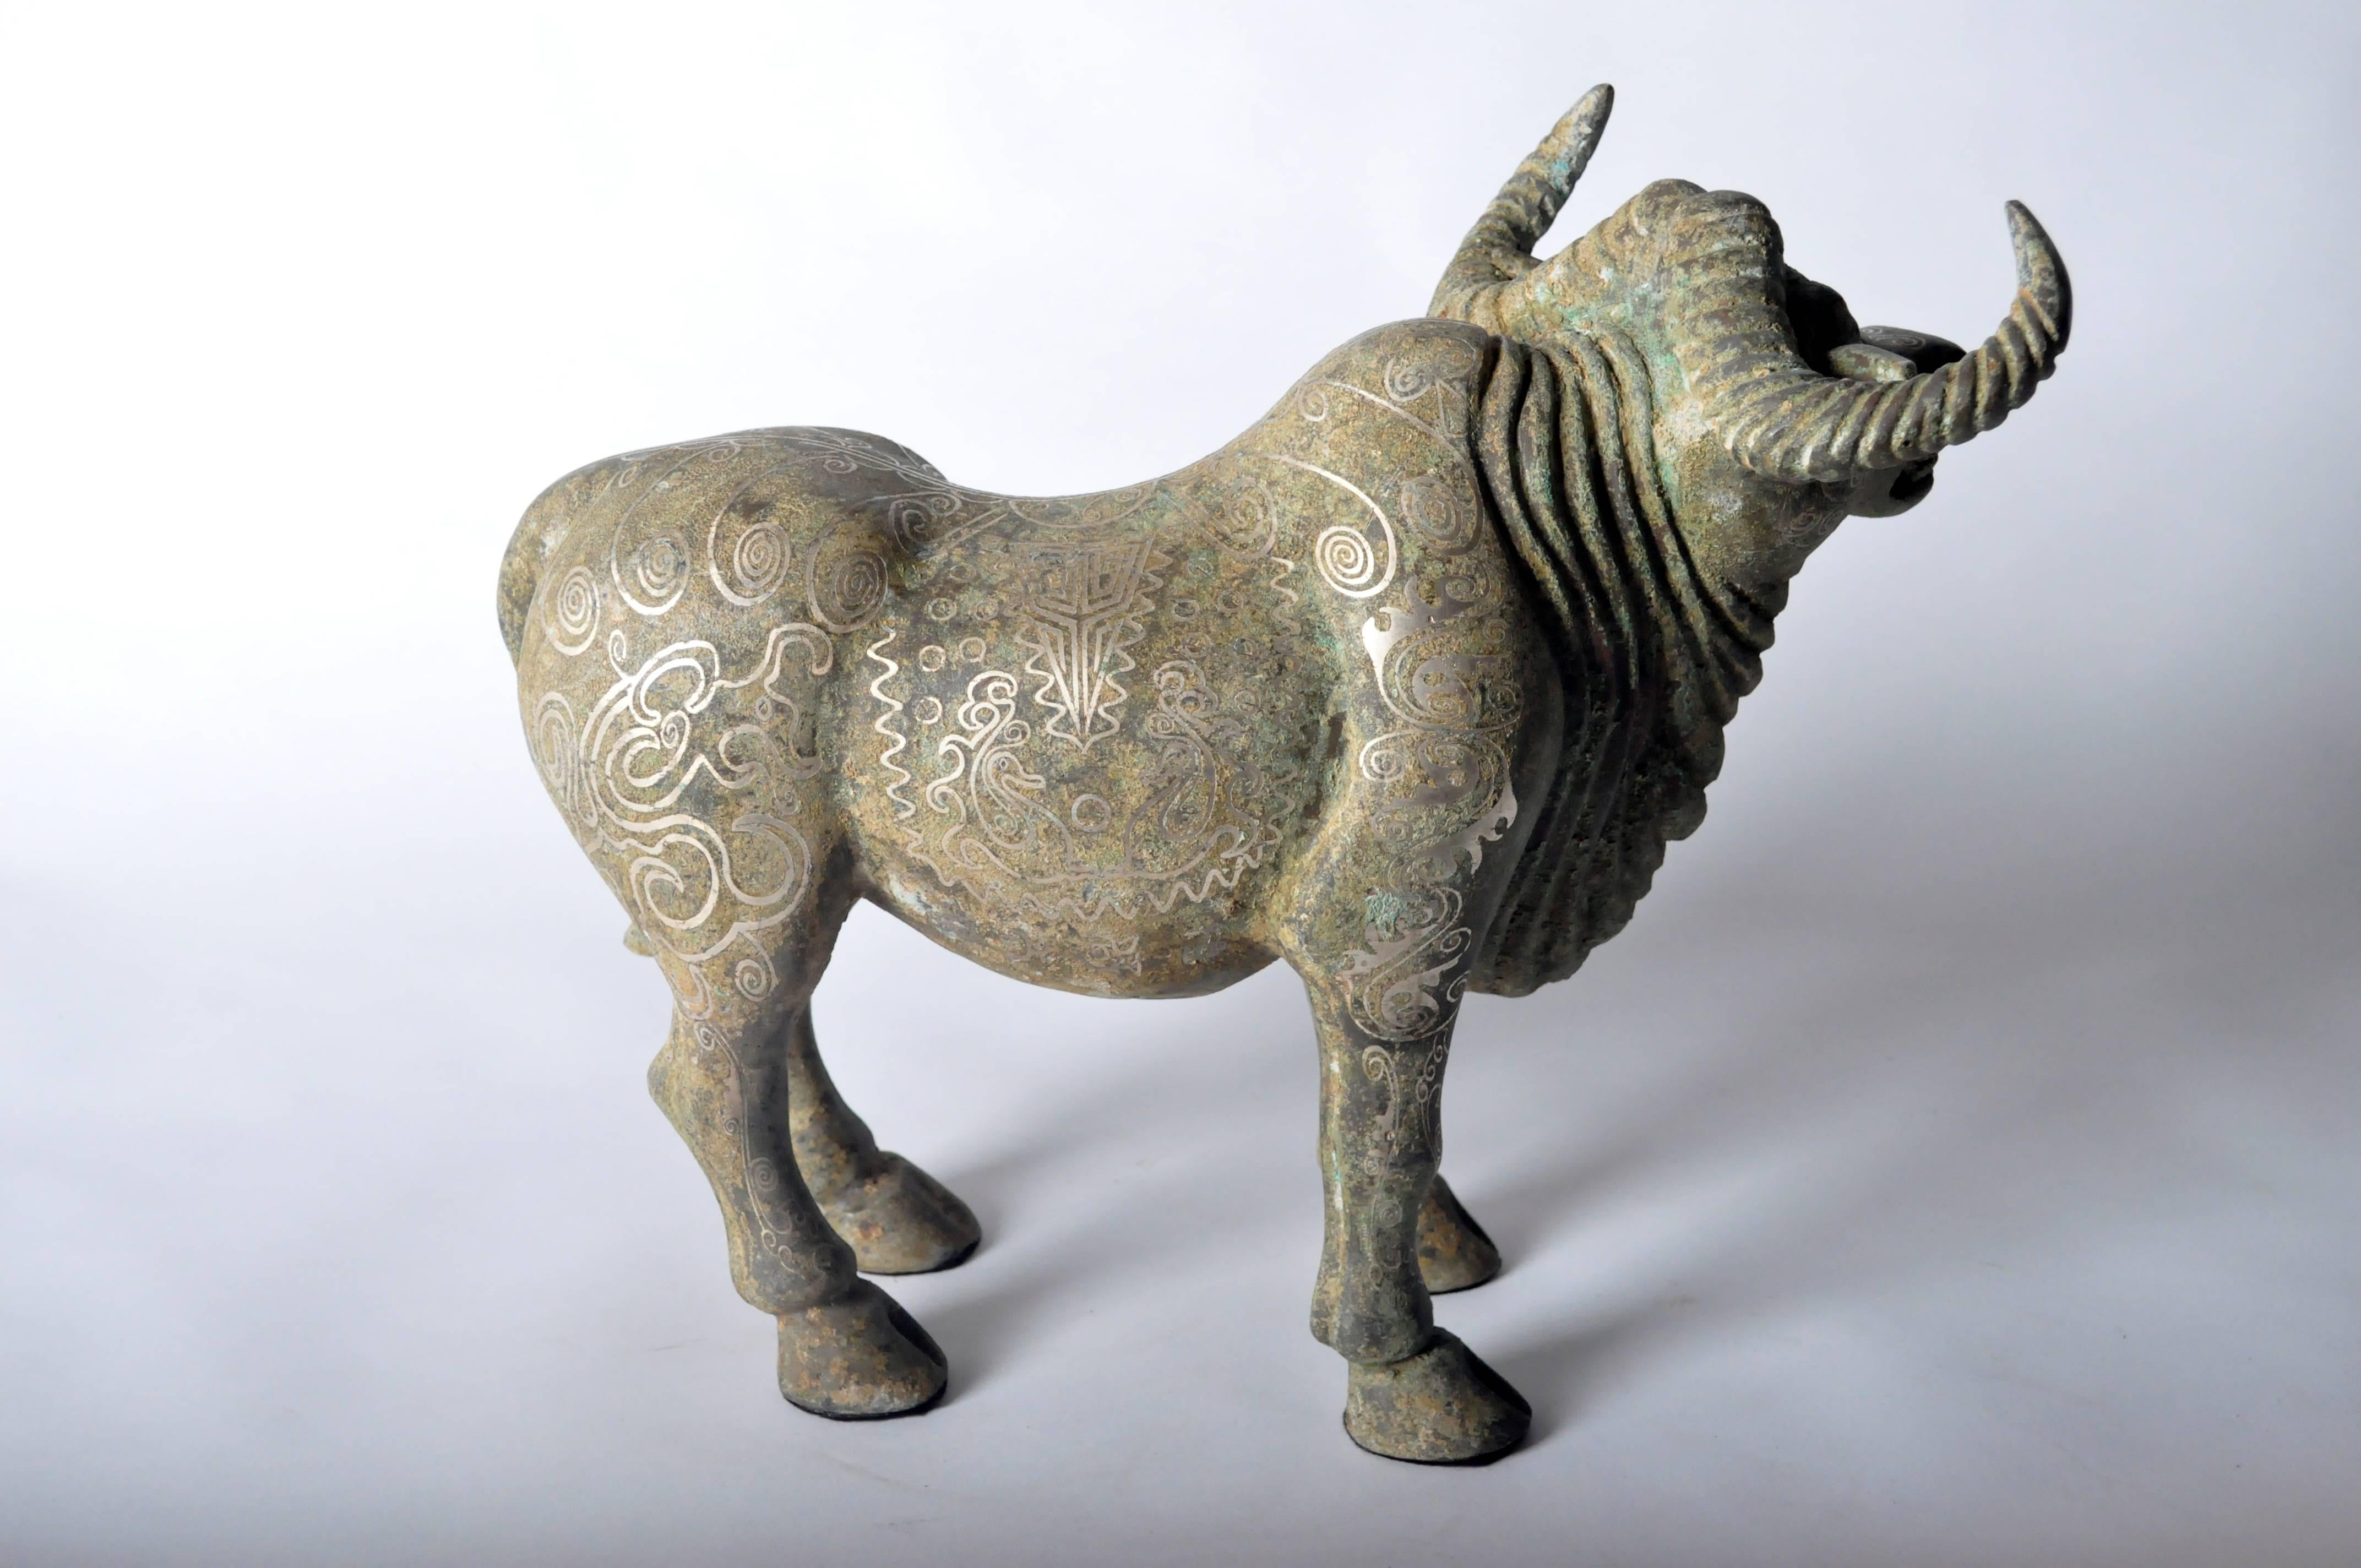 Bronze bull sculpture from Shanxi, China with fine detail.